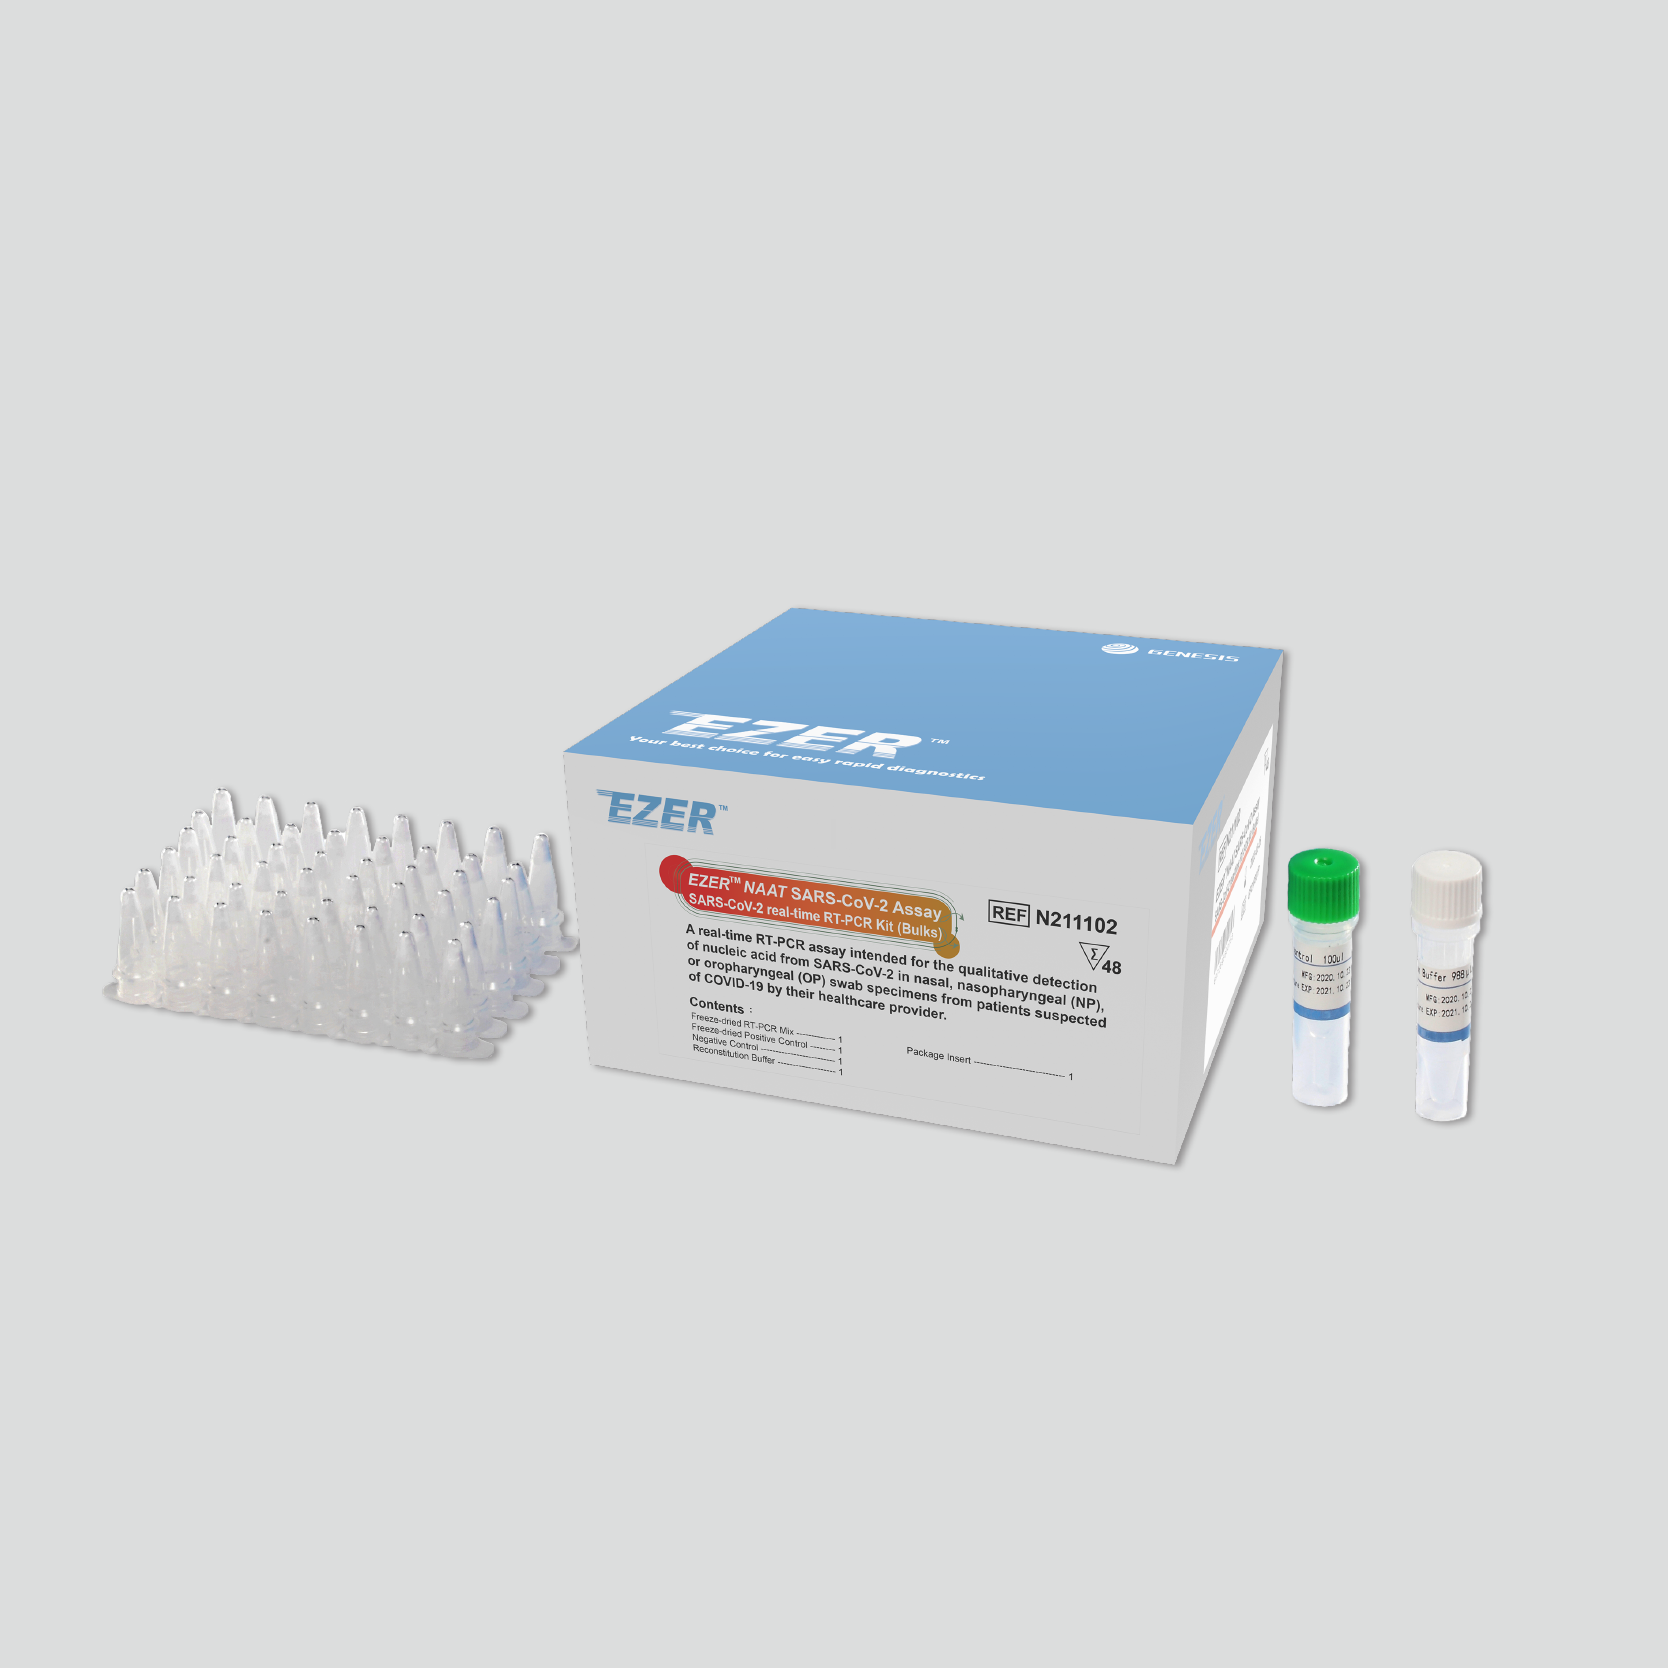 EZER NAAT SARS-CoV-2 real-time RT-PCR Kit Featured Image